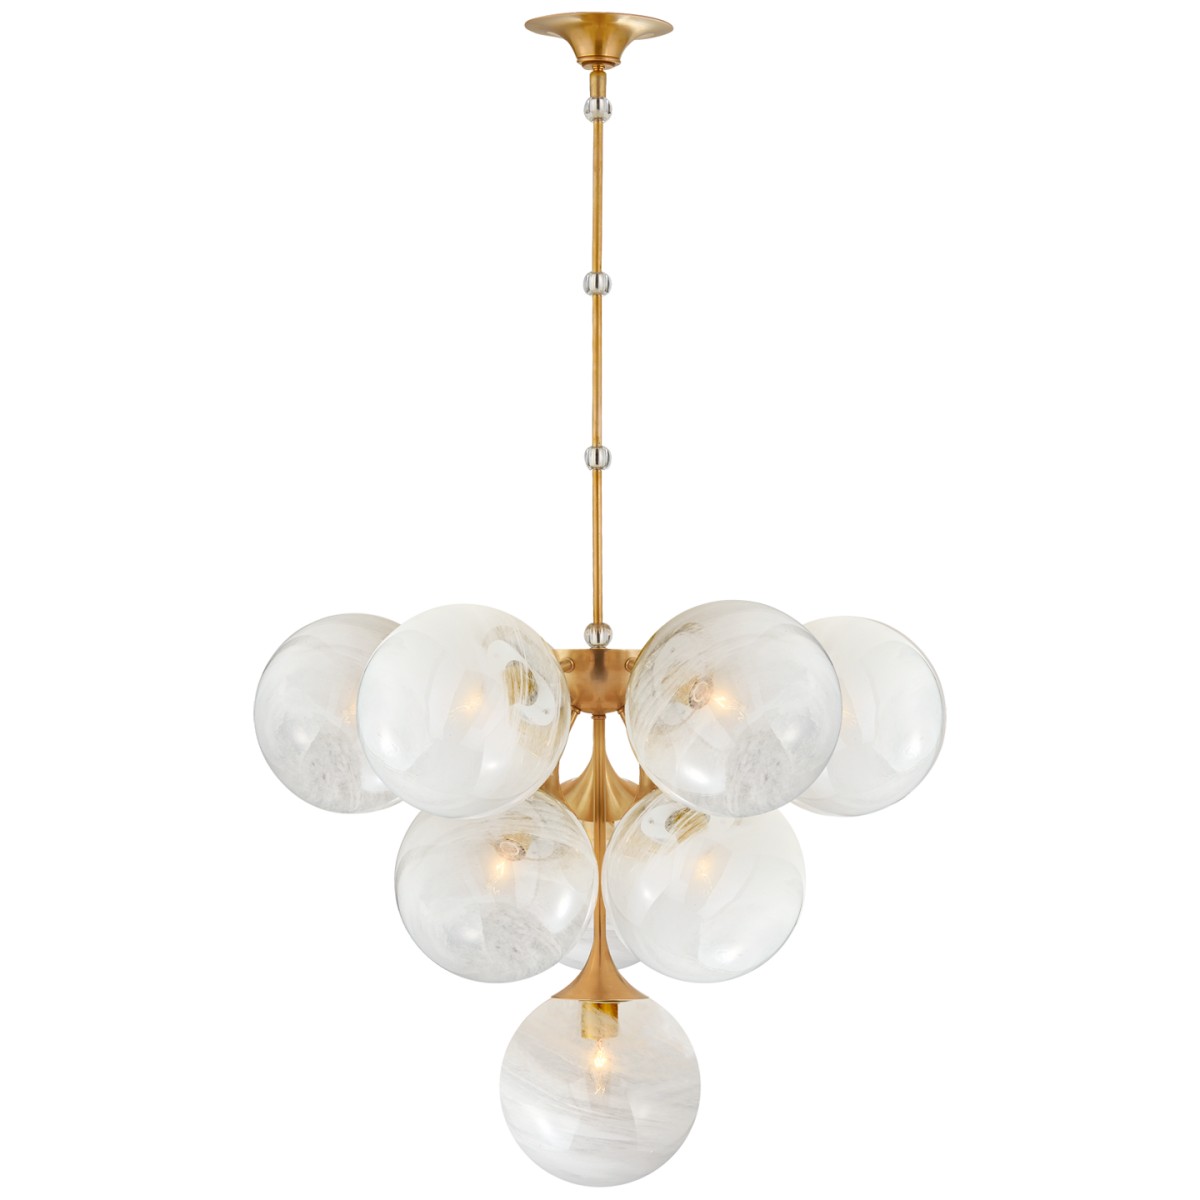 Cristol Tiered Chandelier with White Strie Glass